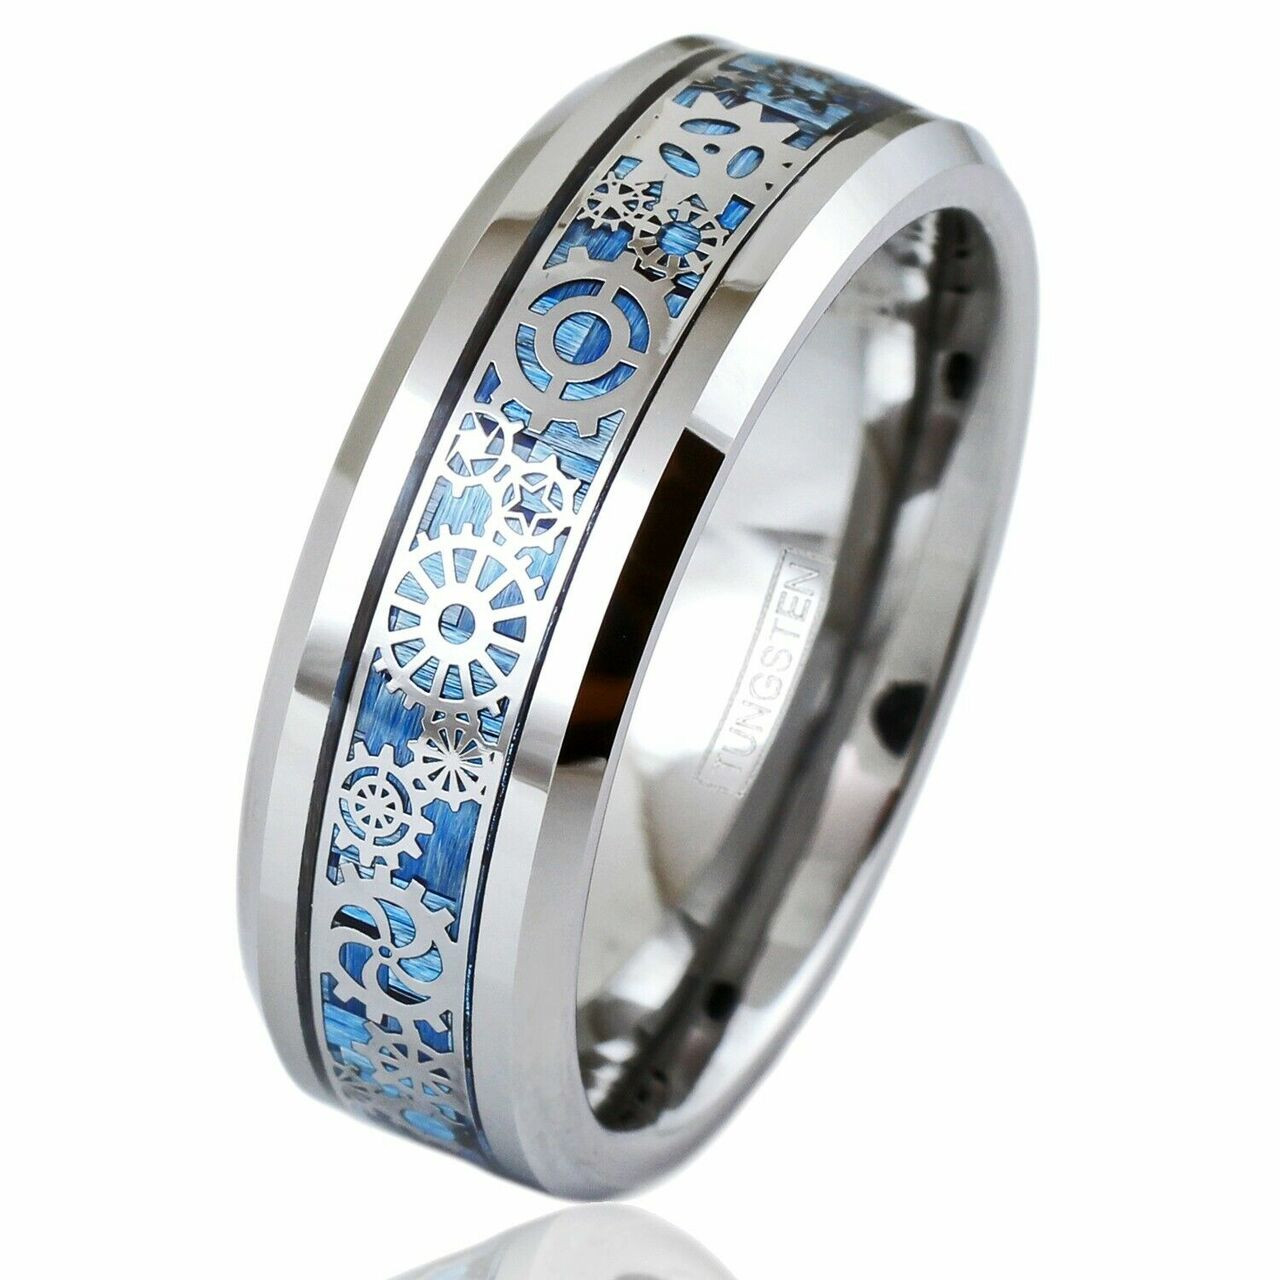 Men's Tungsten Wedding Band (8mm). Wedding Band Sky Blue Carbon Fiber Inlay Silver Band with Silver Mechanical Gears. Tungsten Carbide Ring